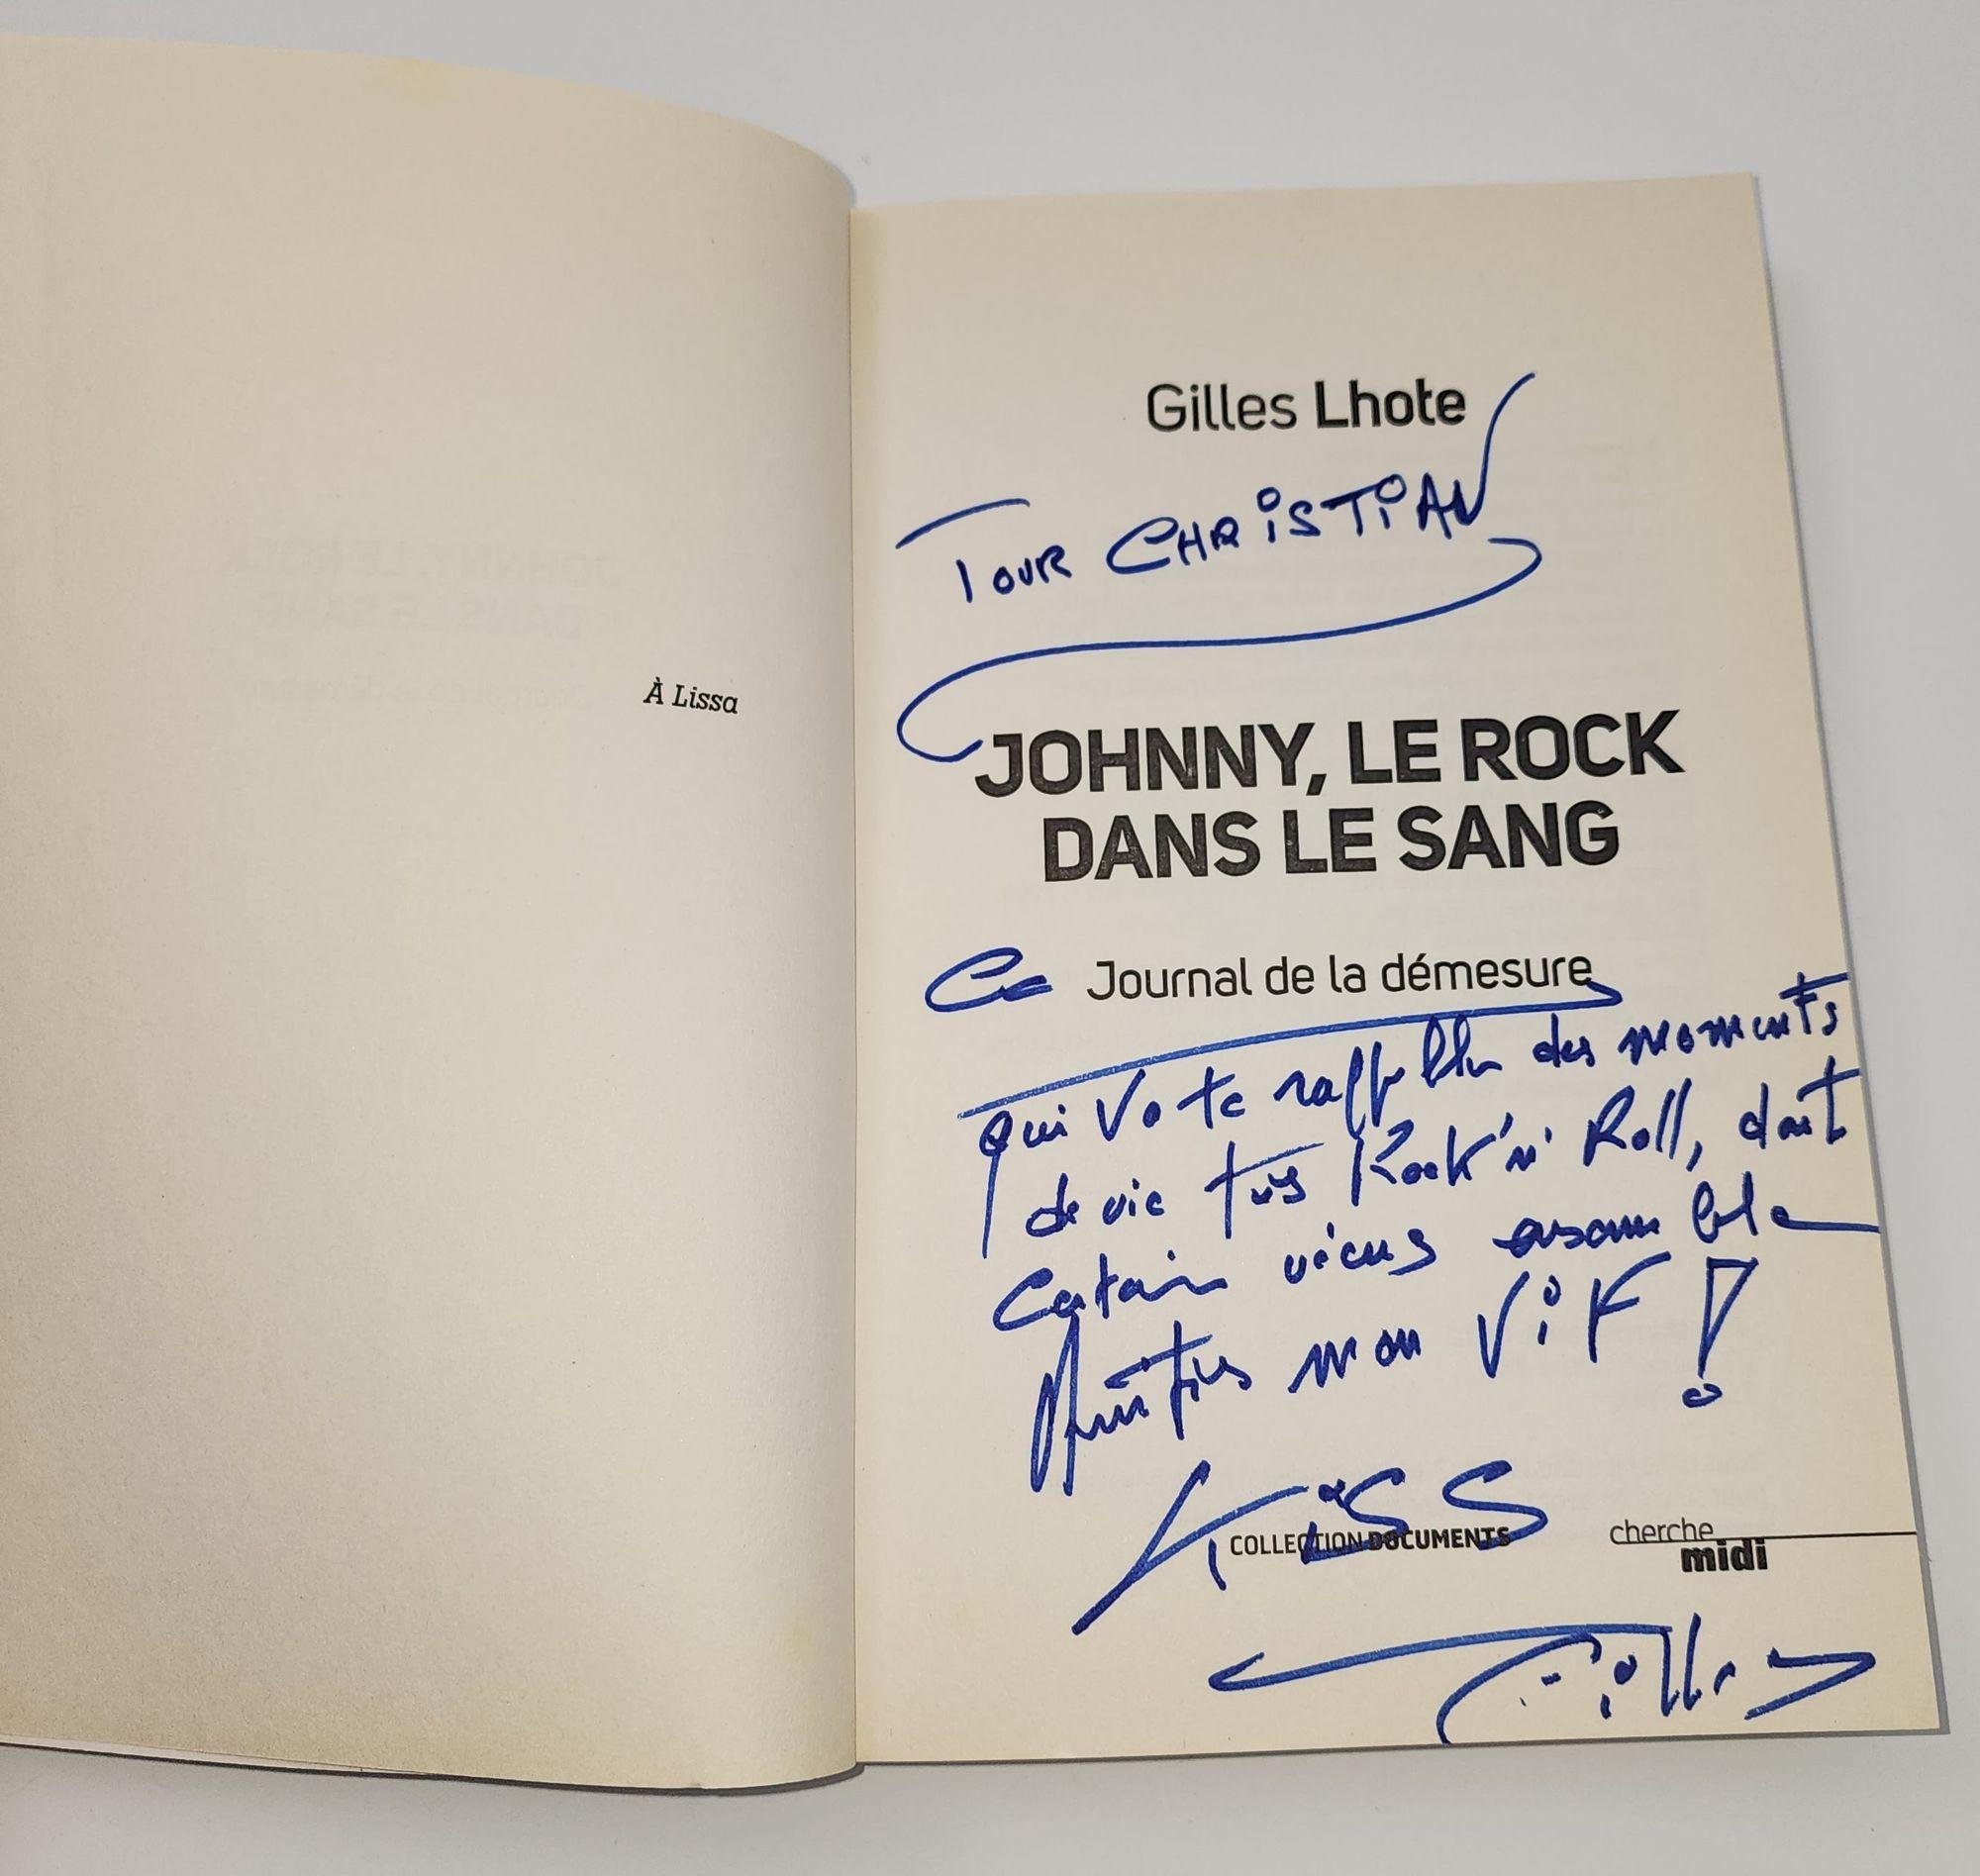 Johnny Halliday Rock in the Blood French Edition Signed by Gilles Lhote author, paperback book.Johnny Halliday, Rock in the Blood - French Edition - Dedication, signed by the author Gilles Lhote to fashion designer Christian Audigier.
Johnny